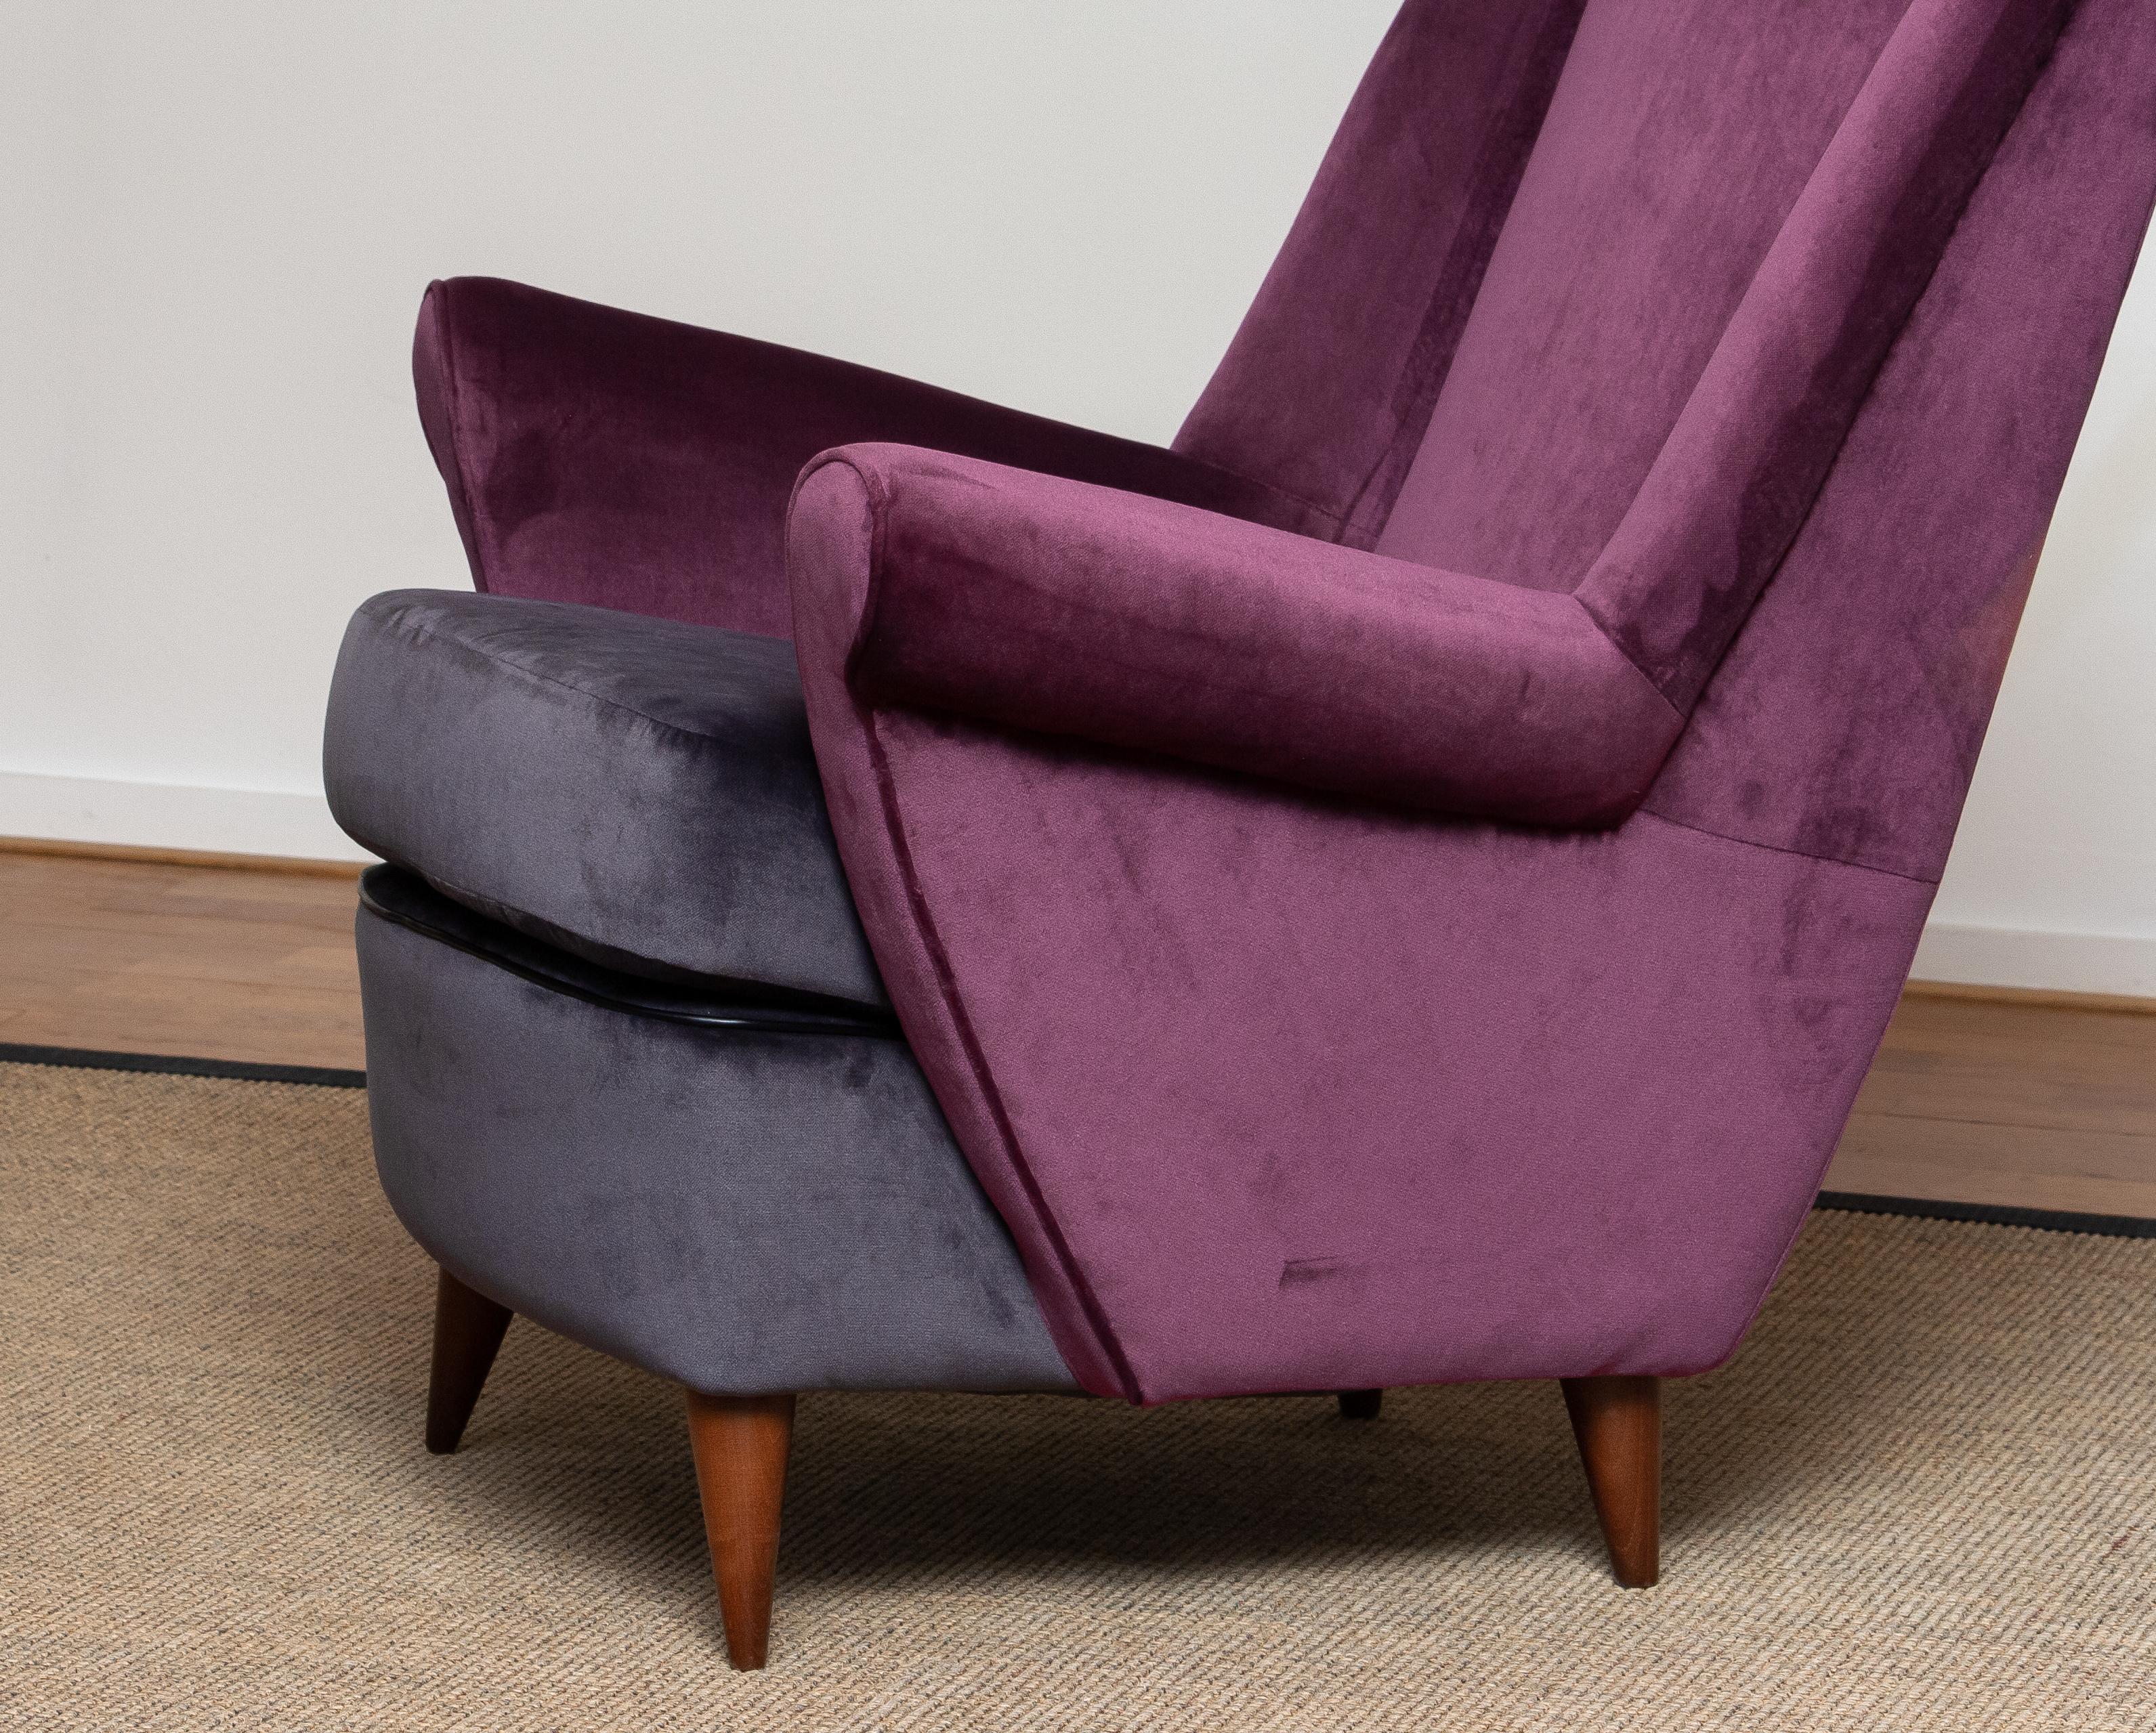 Absolutely beautiful 1950s lounge or easy chair . The fabulous color combination and choice of fabric, magenta and dark gray, makes this chair a real eye catcher. This chairs are completely restored and therefor in excellent condition. Also the